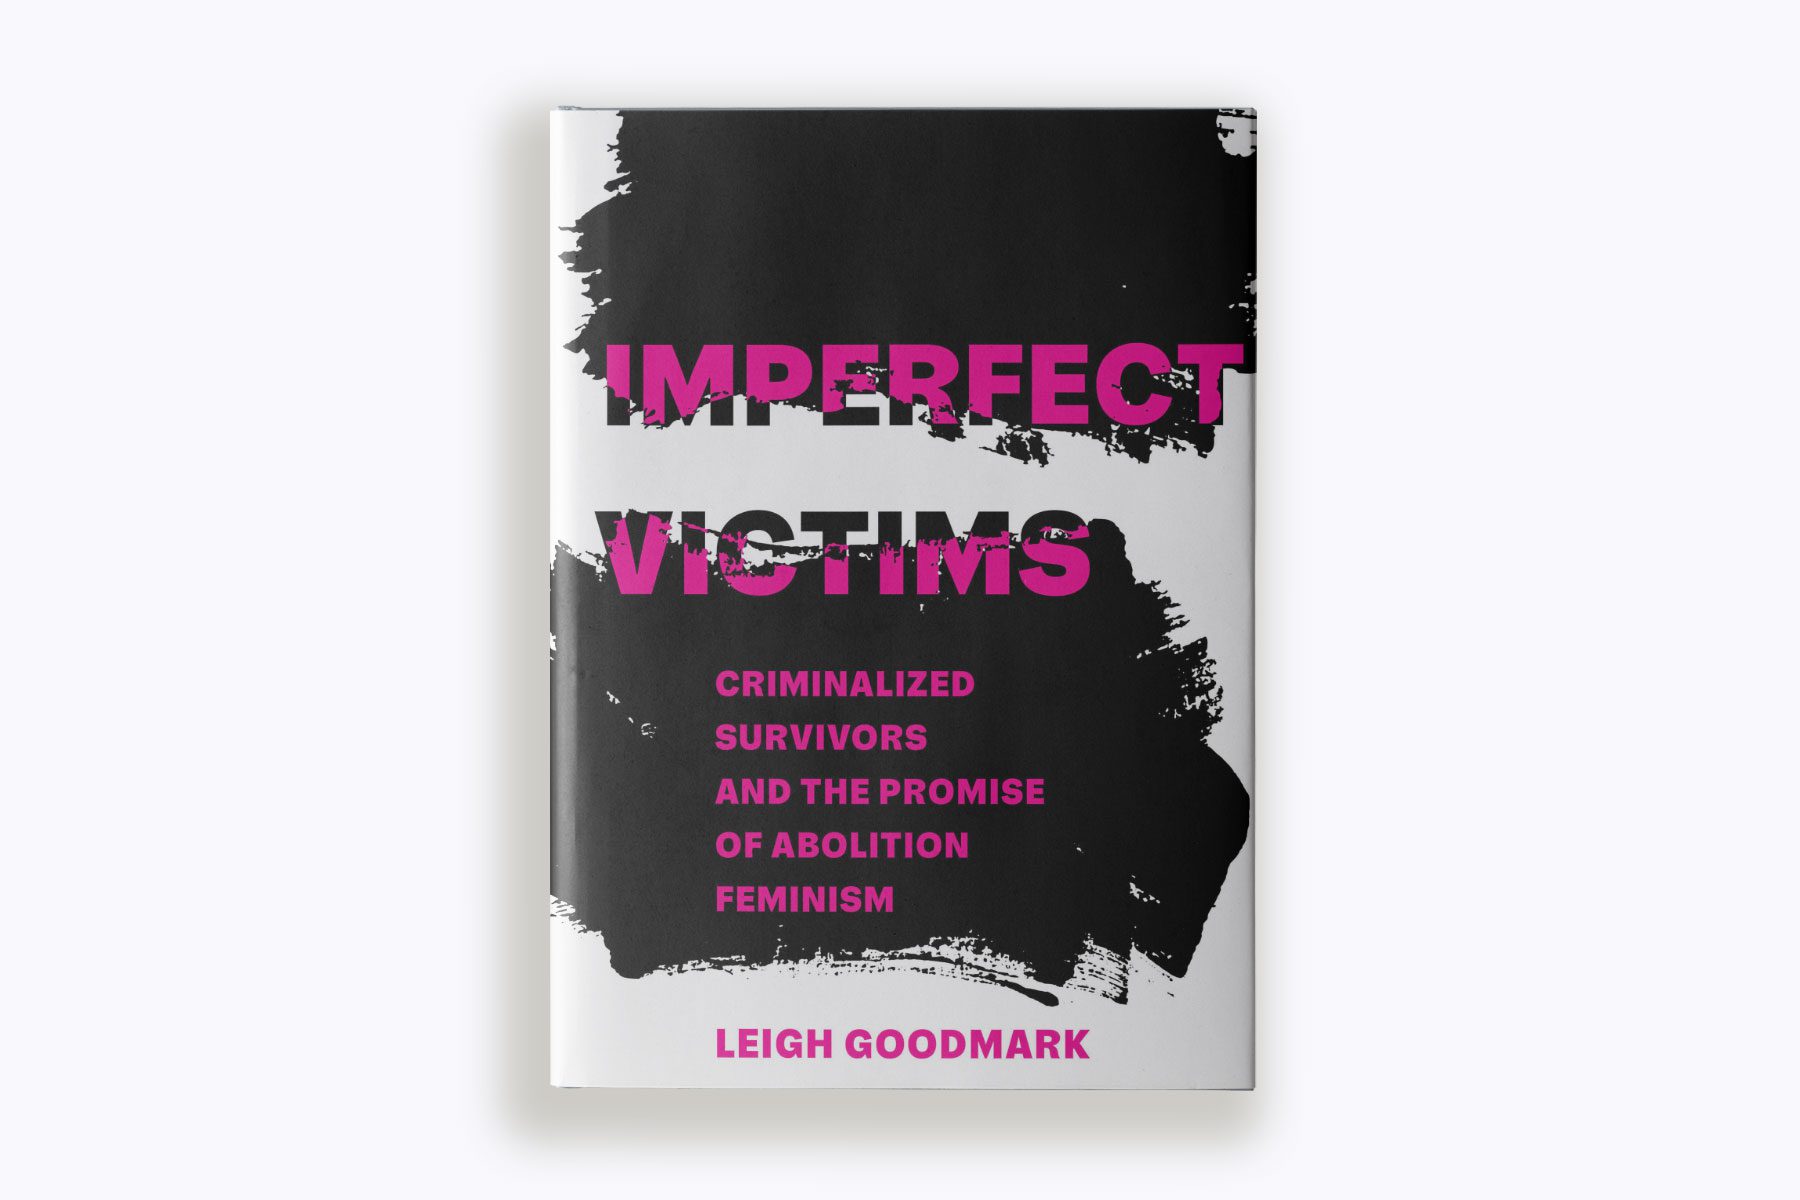 Leigh Goodmark's book, "Imperfect Victims: Criminalized Survivors and The Promise of Abolition Feminism"